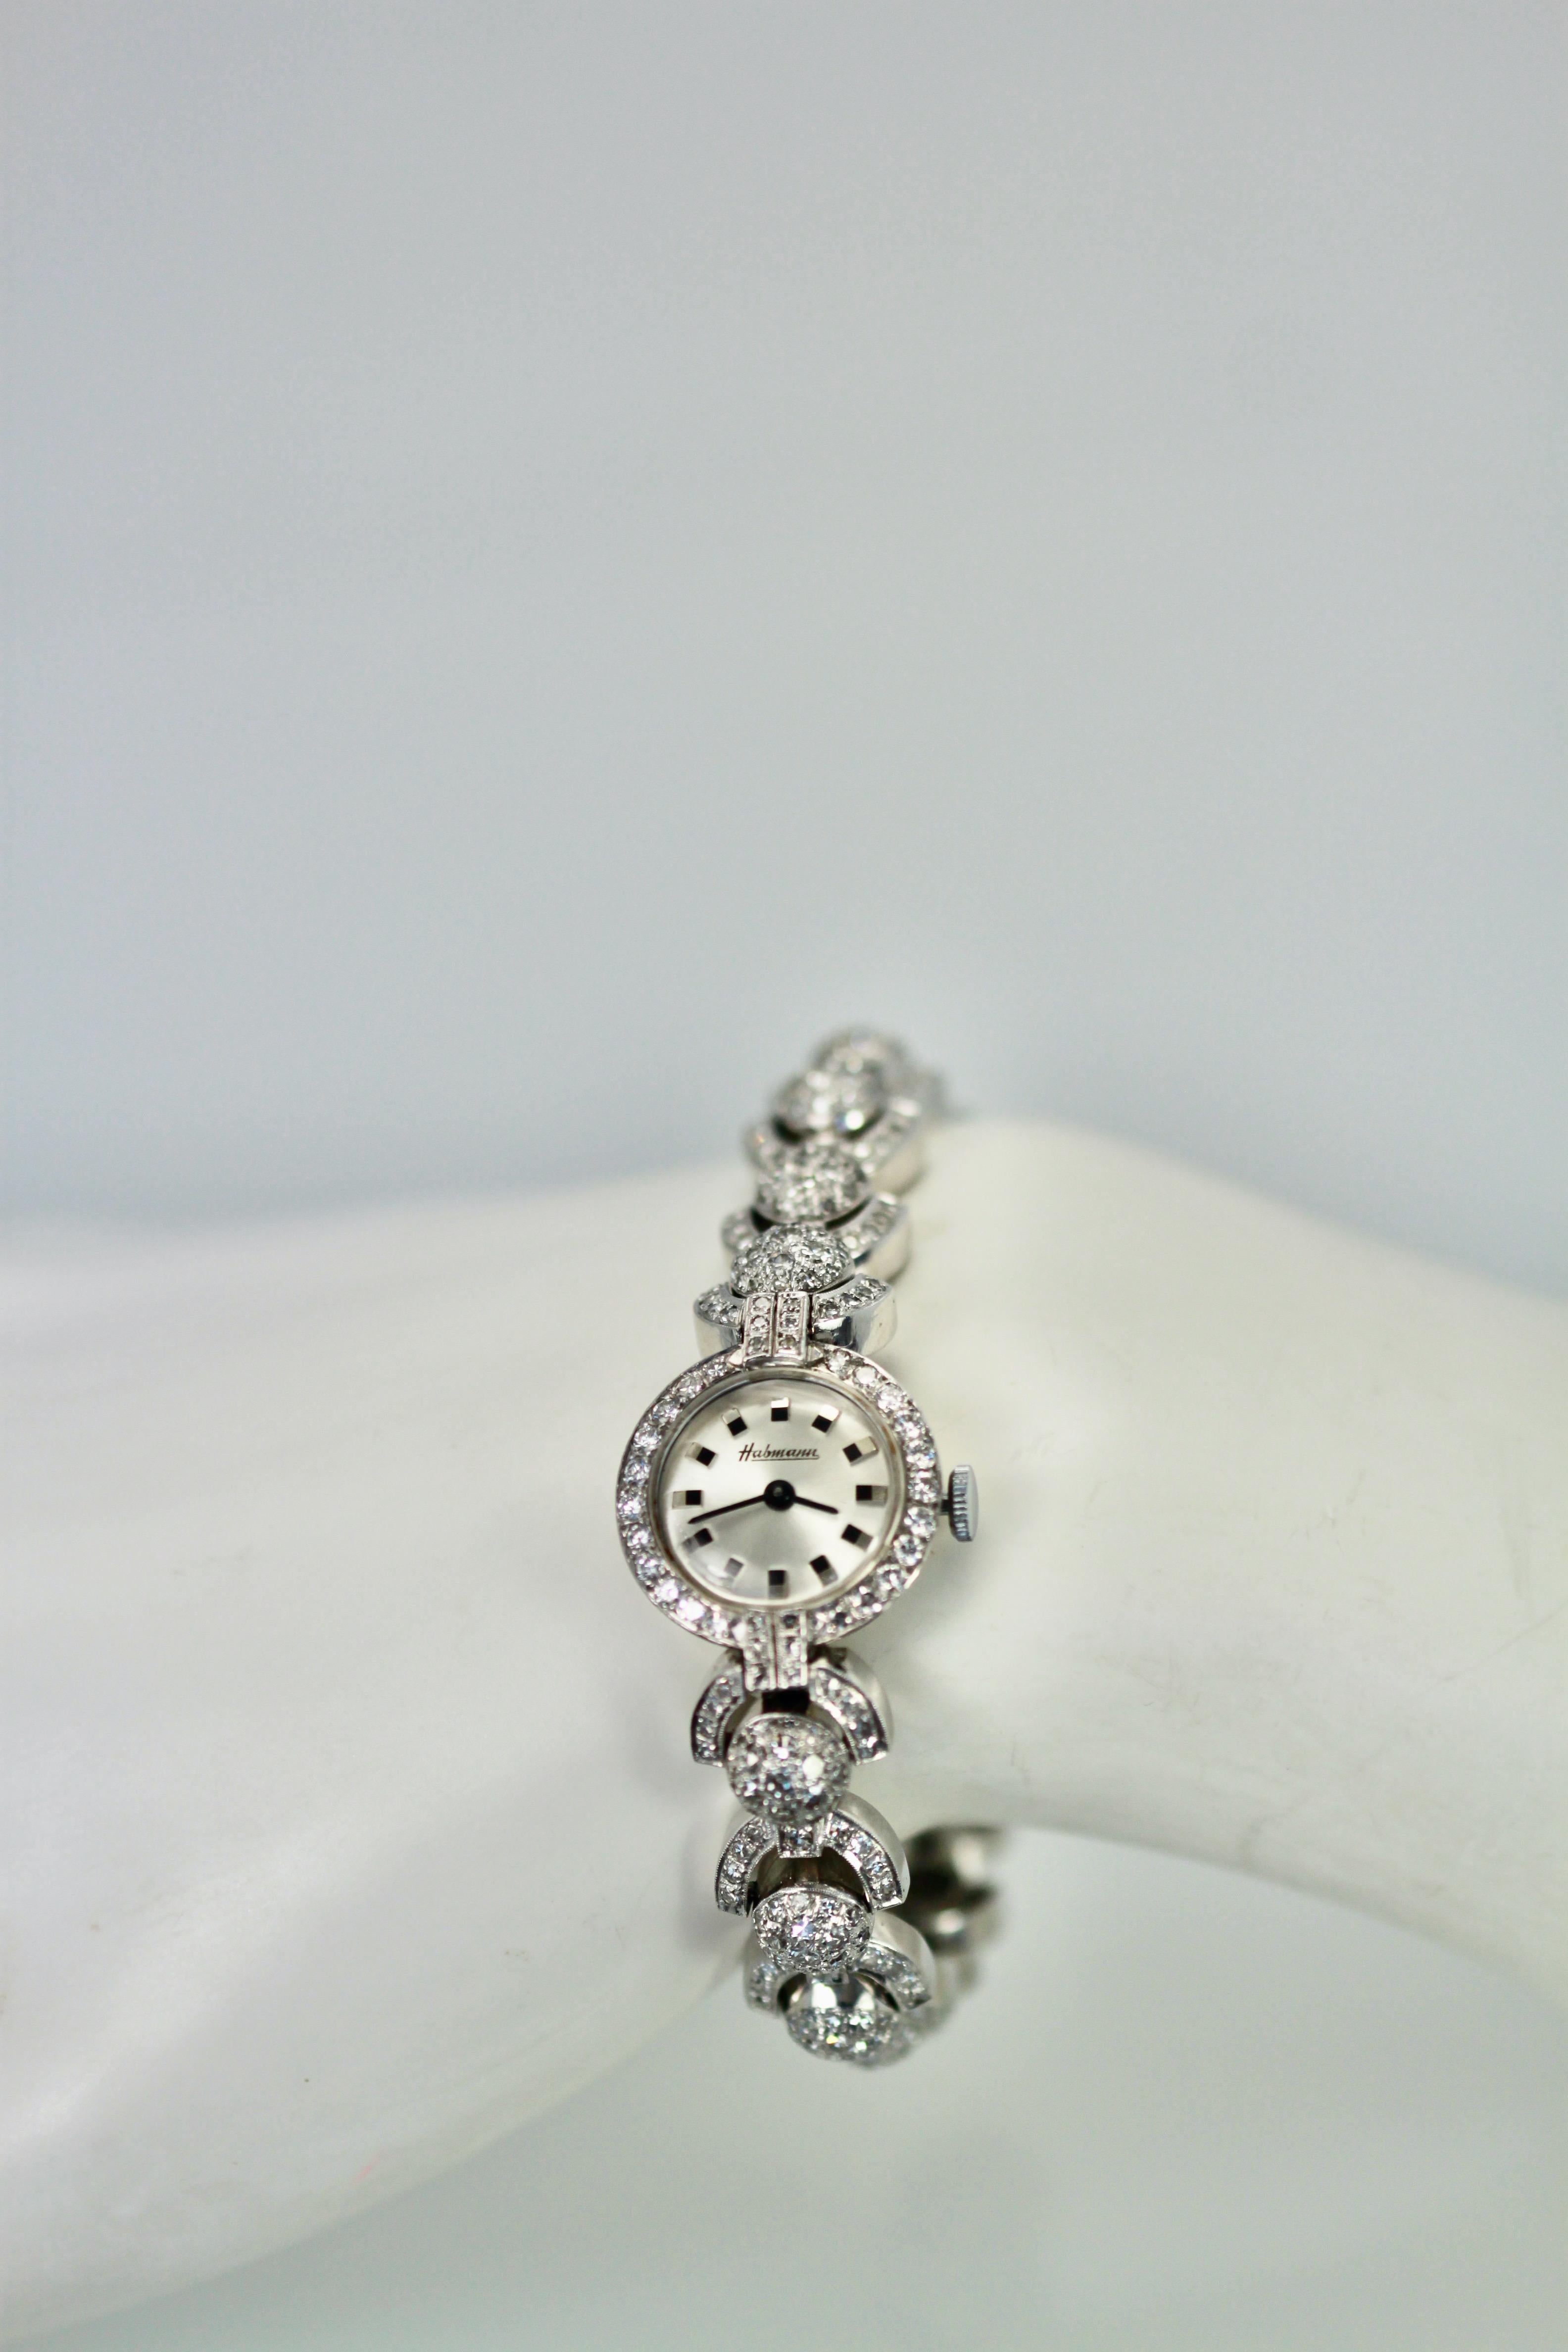 The 1950's brought us jeweled and Diamond watches that looked like bracelets. This Diamond Cocktail watch is very unique as the bracelet is 3 dimensional and just gorgeous.
This is done in a ball and loop design totaling 4.2 carats in mostly single